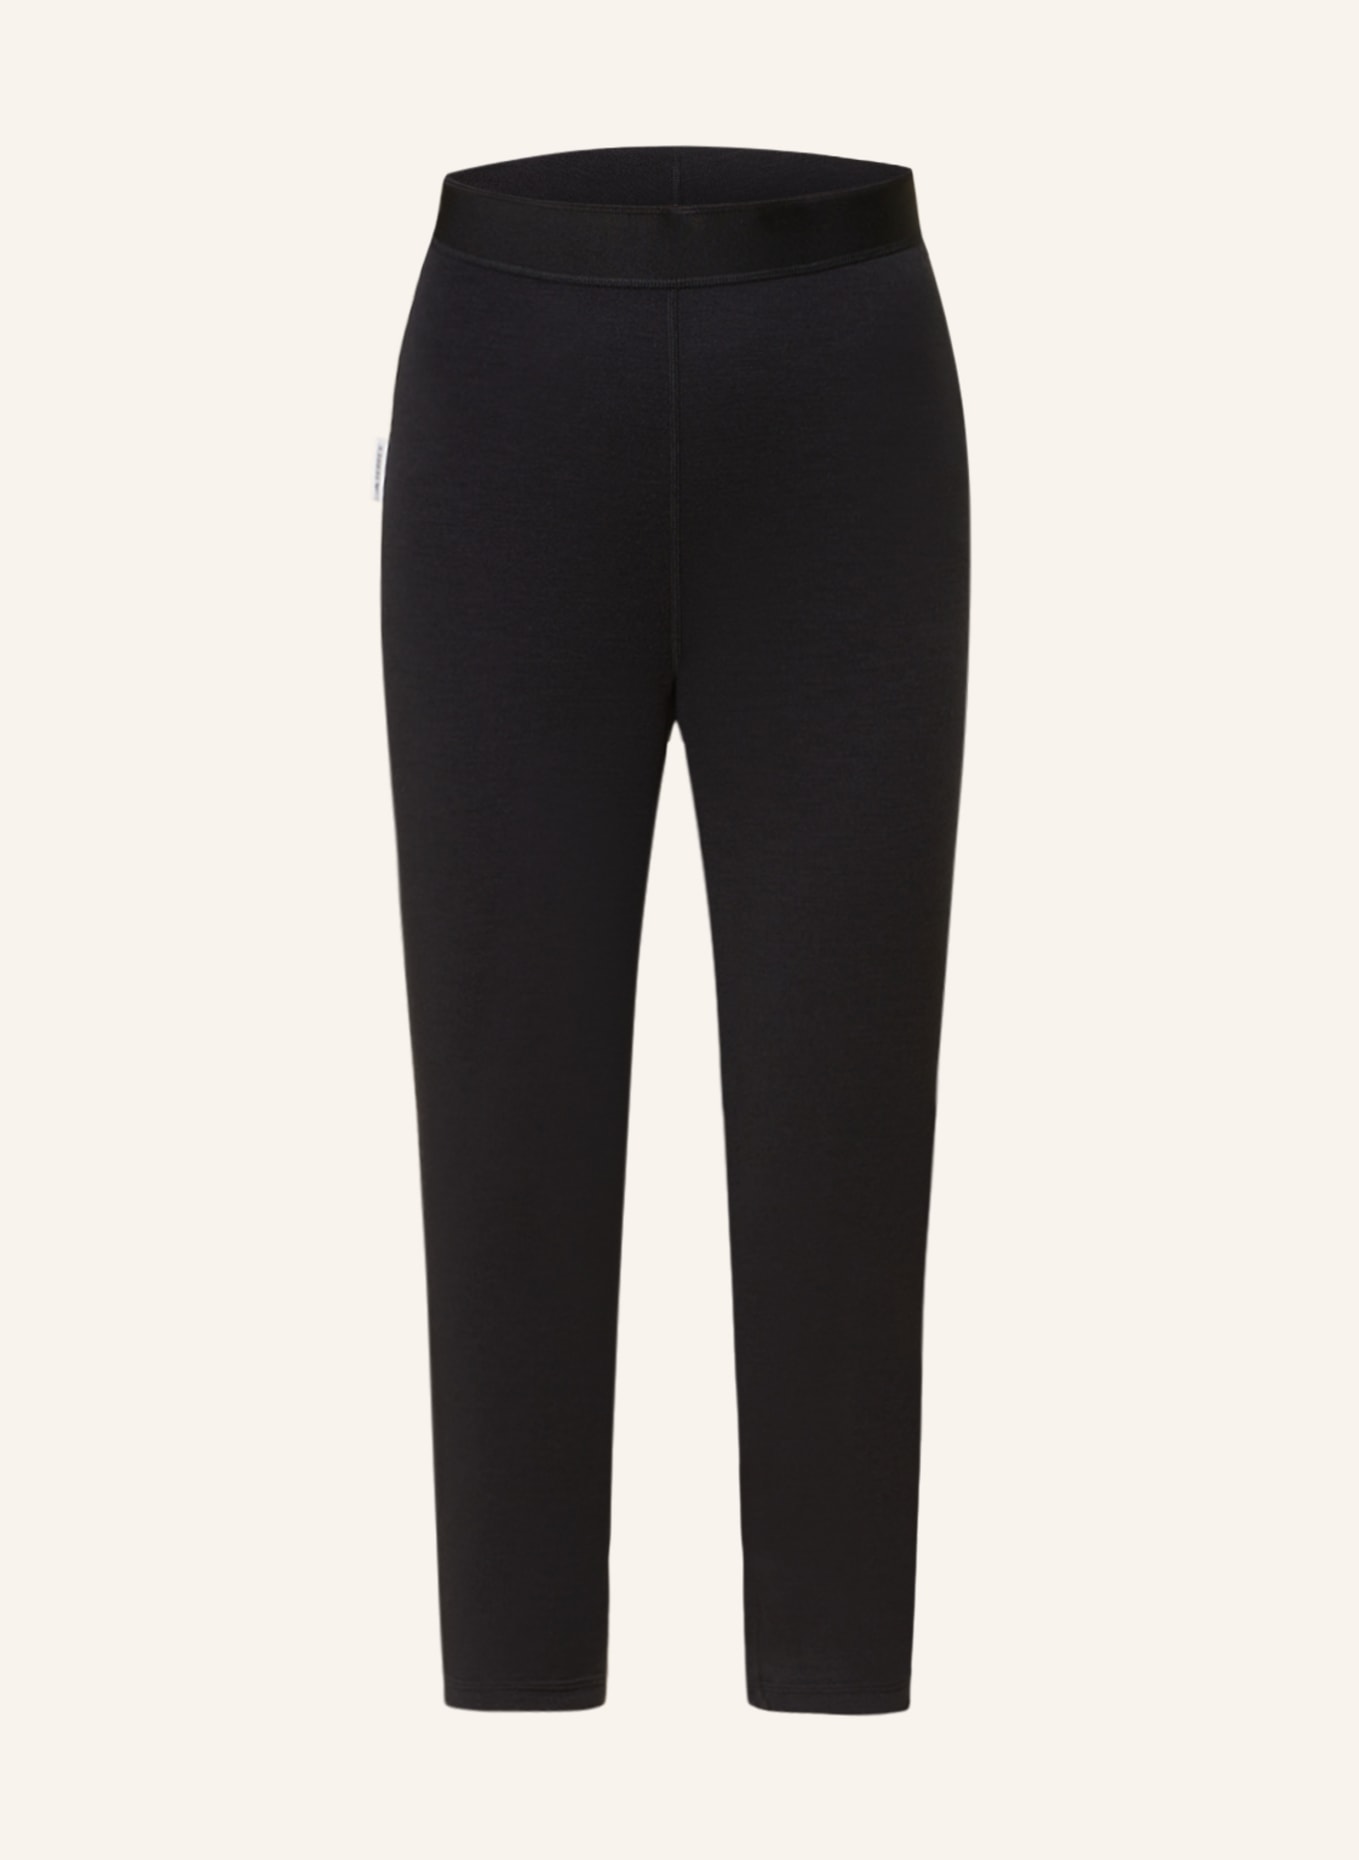 adidas Functional baselayer trousers XPERIOR MERINO 260 with cropped leg length made of merino wool, Color: BLACK (Image 1)